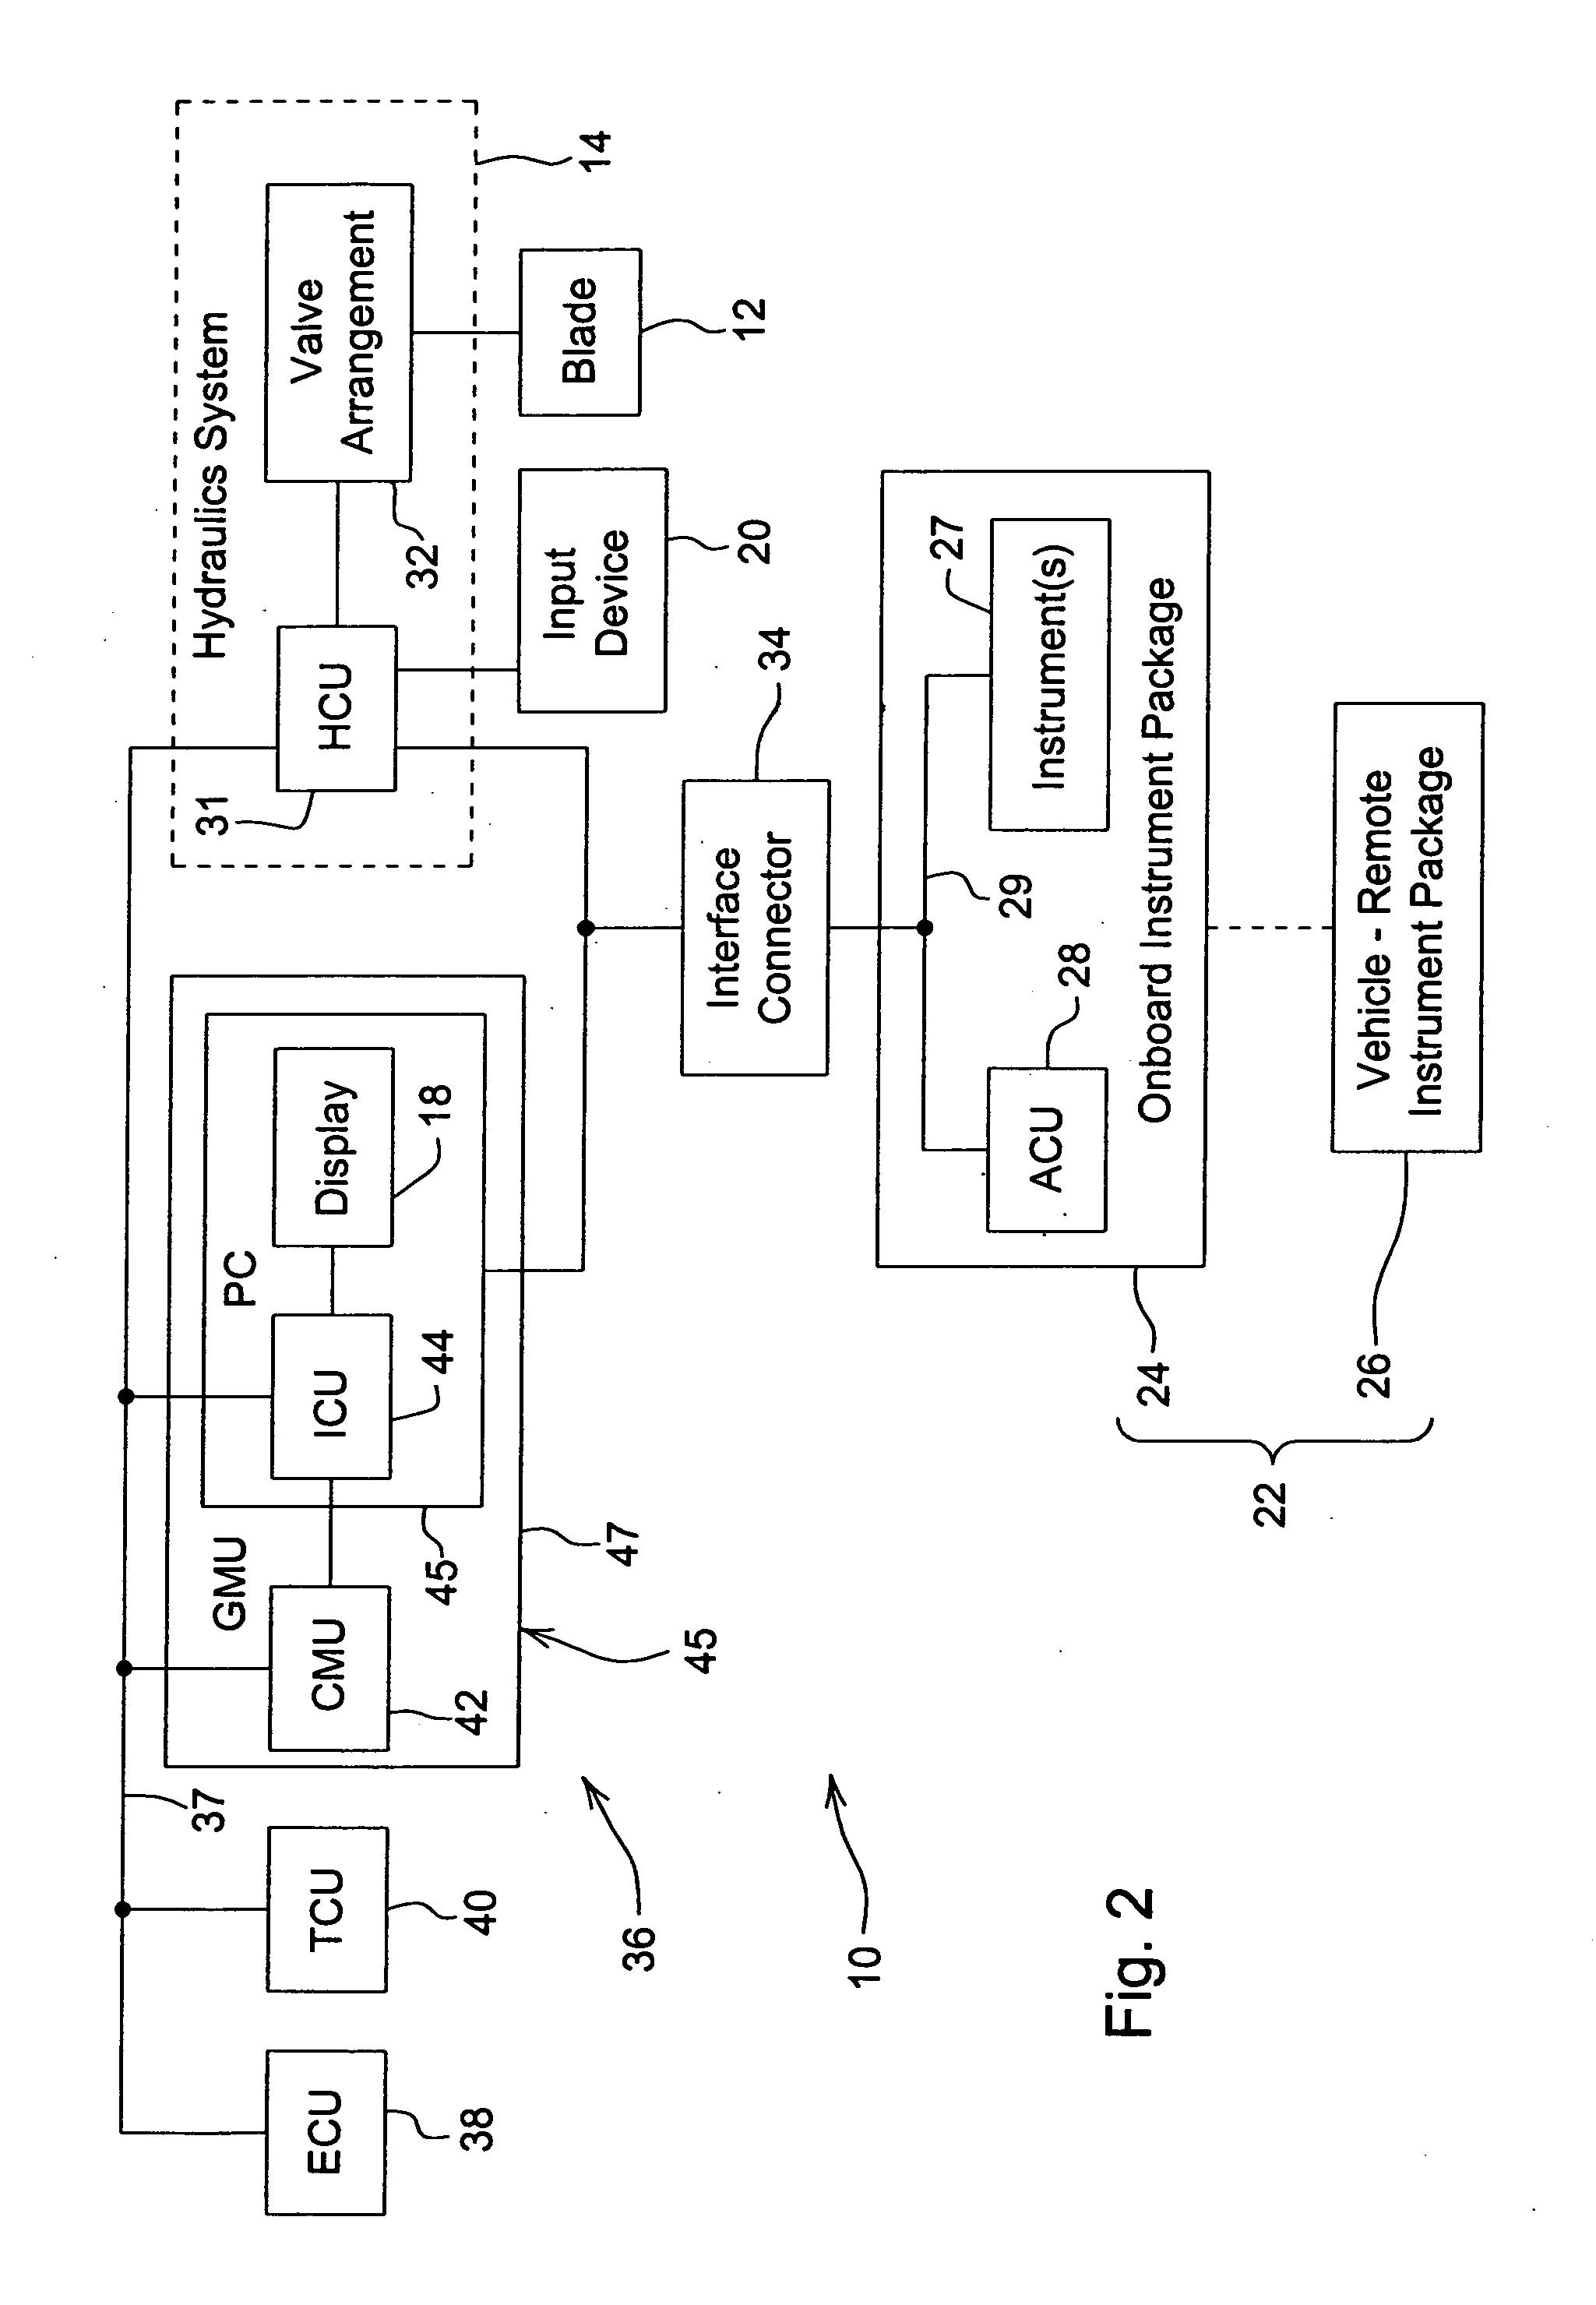 Method and apparatus for retrofitting work vehicle with blade position sensing and control system